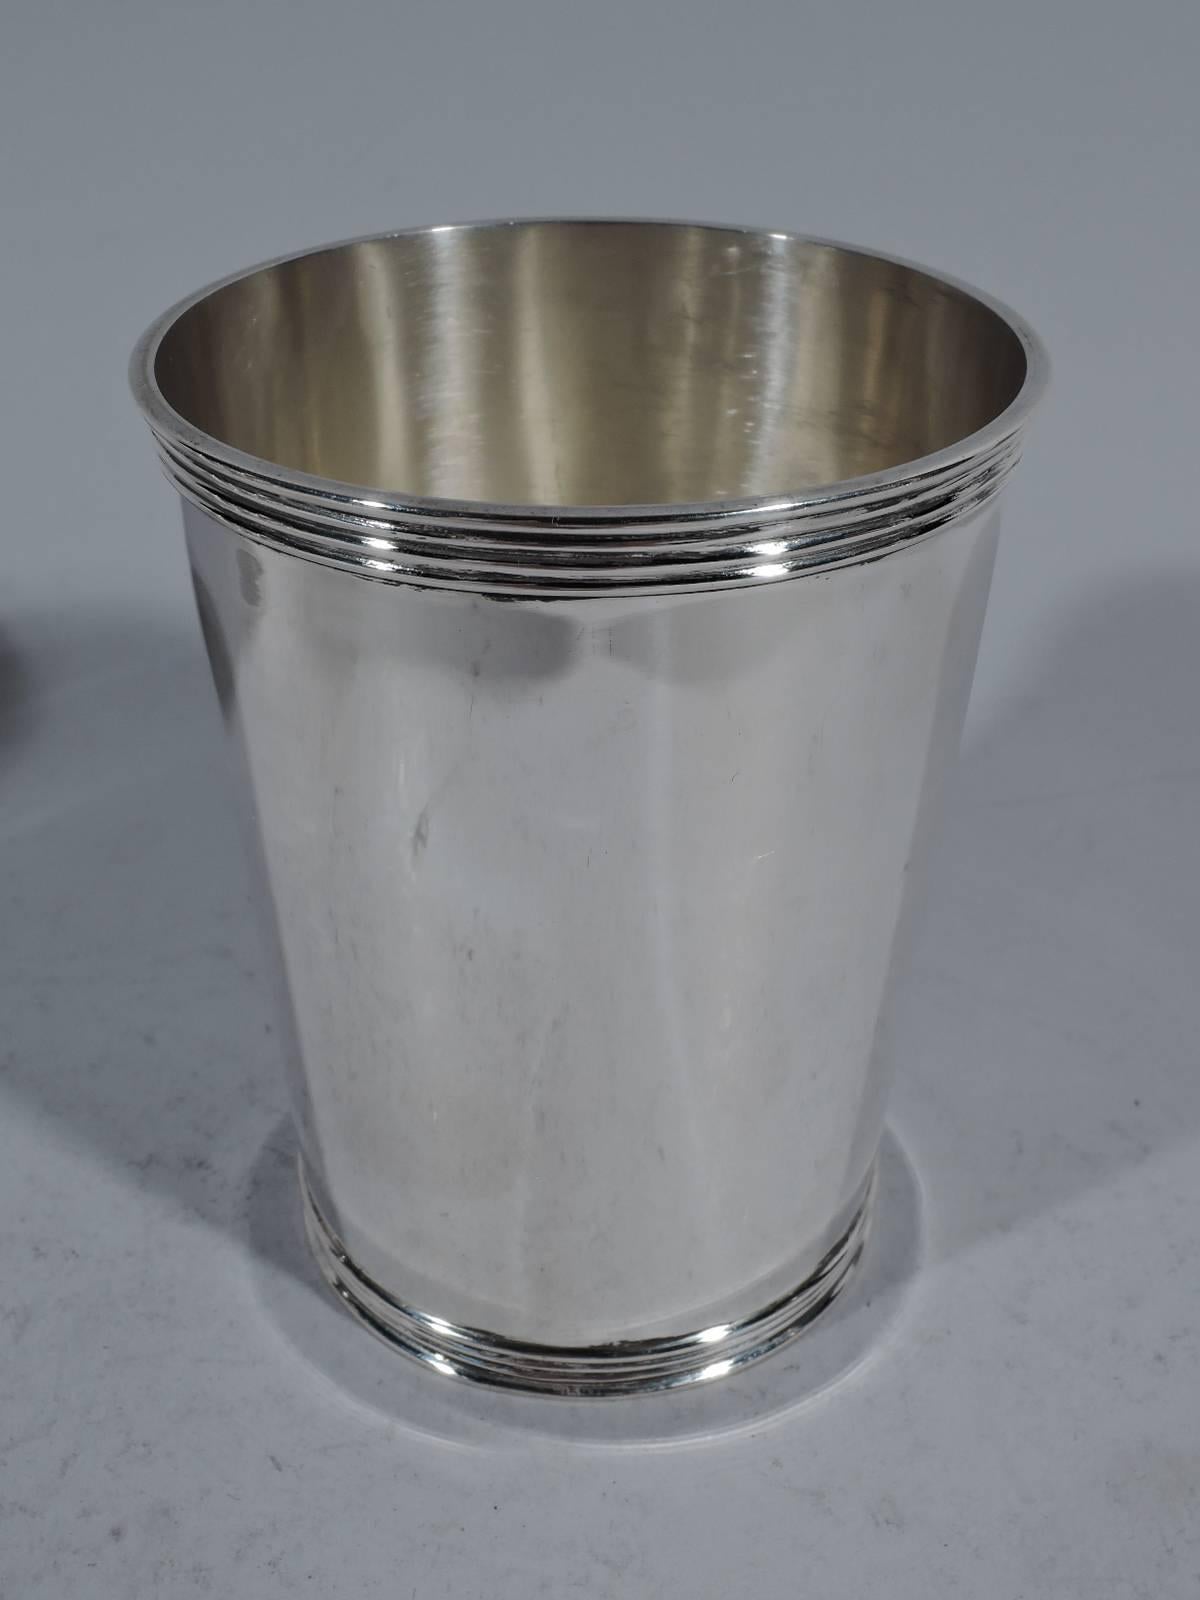 Set of four sterling silver mint juleps. Made by Manchester in Providence. Straight and tapering sides and reeded rim and foot. A great starter set. Hallmark includes no. 3759. Total weight: 15.2 troy ounces.